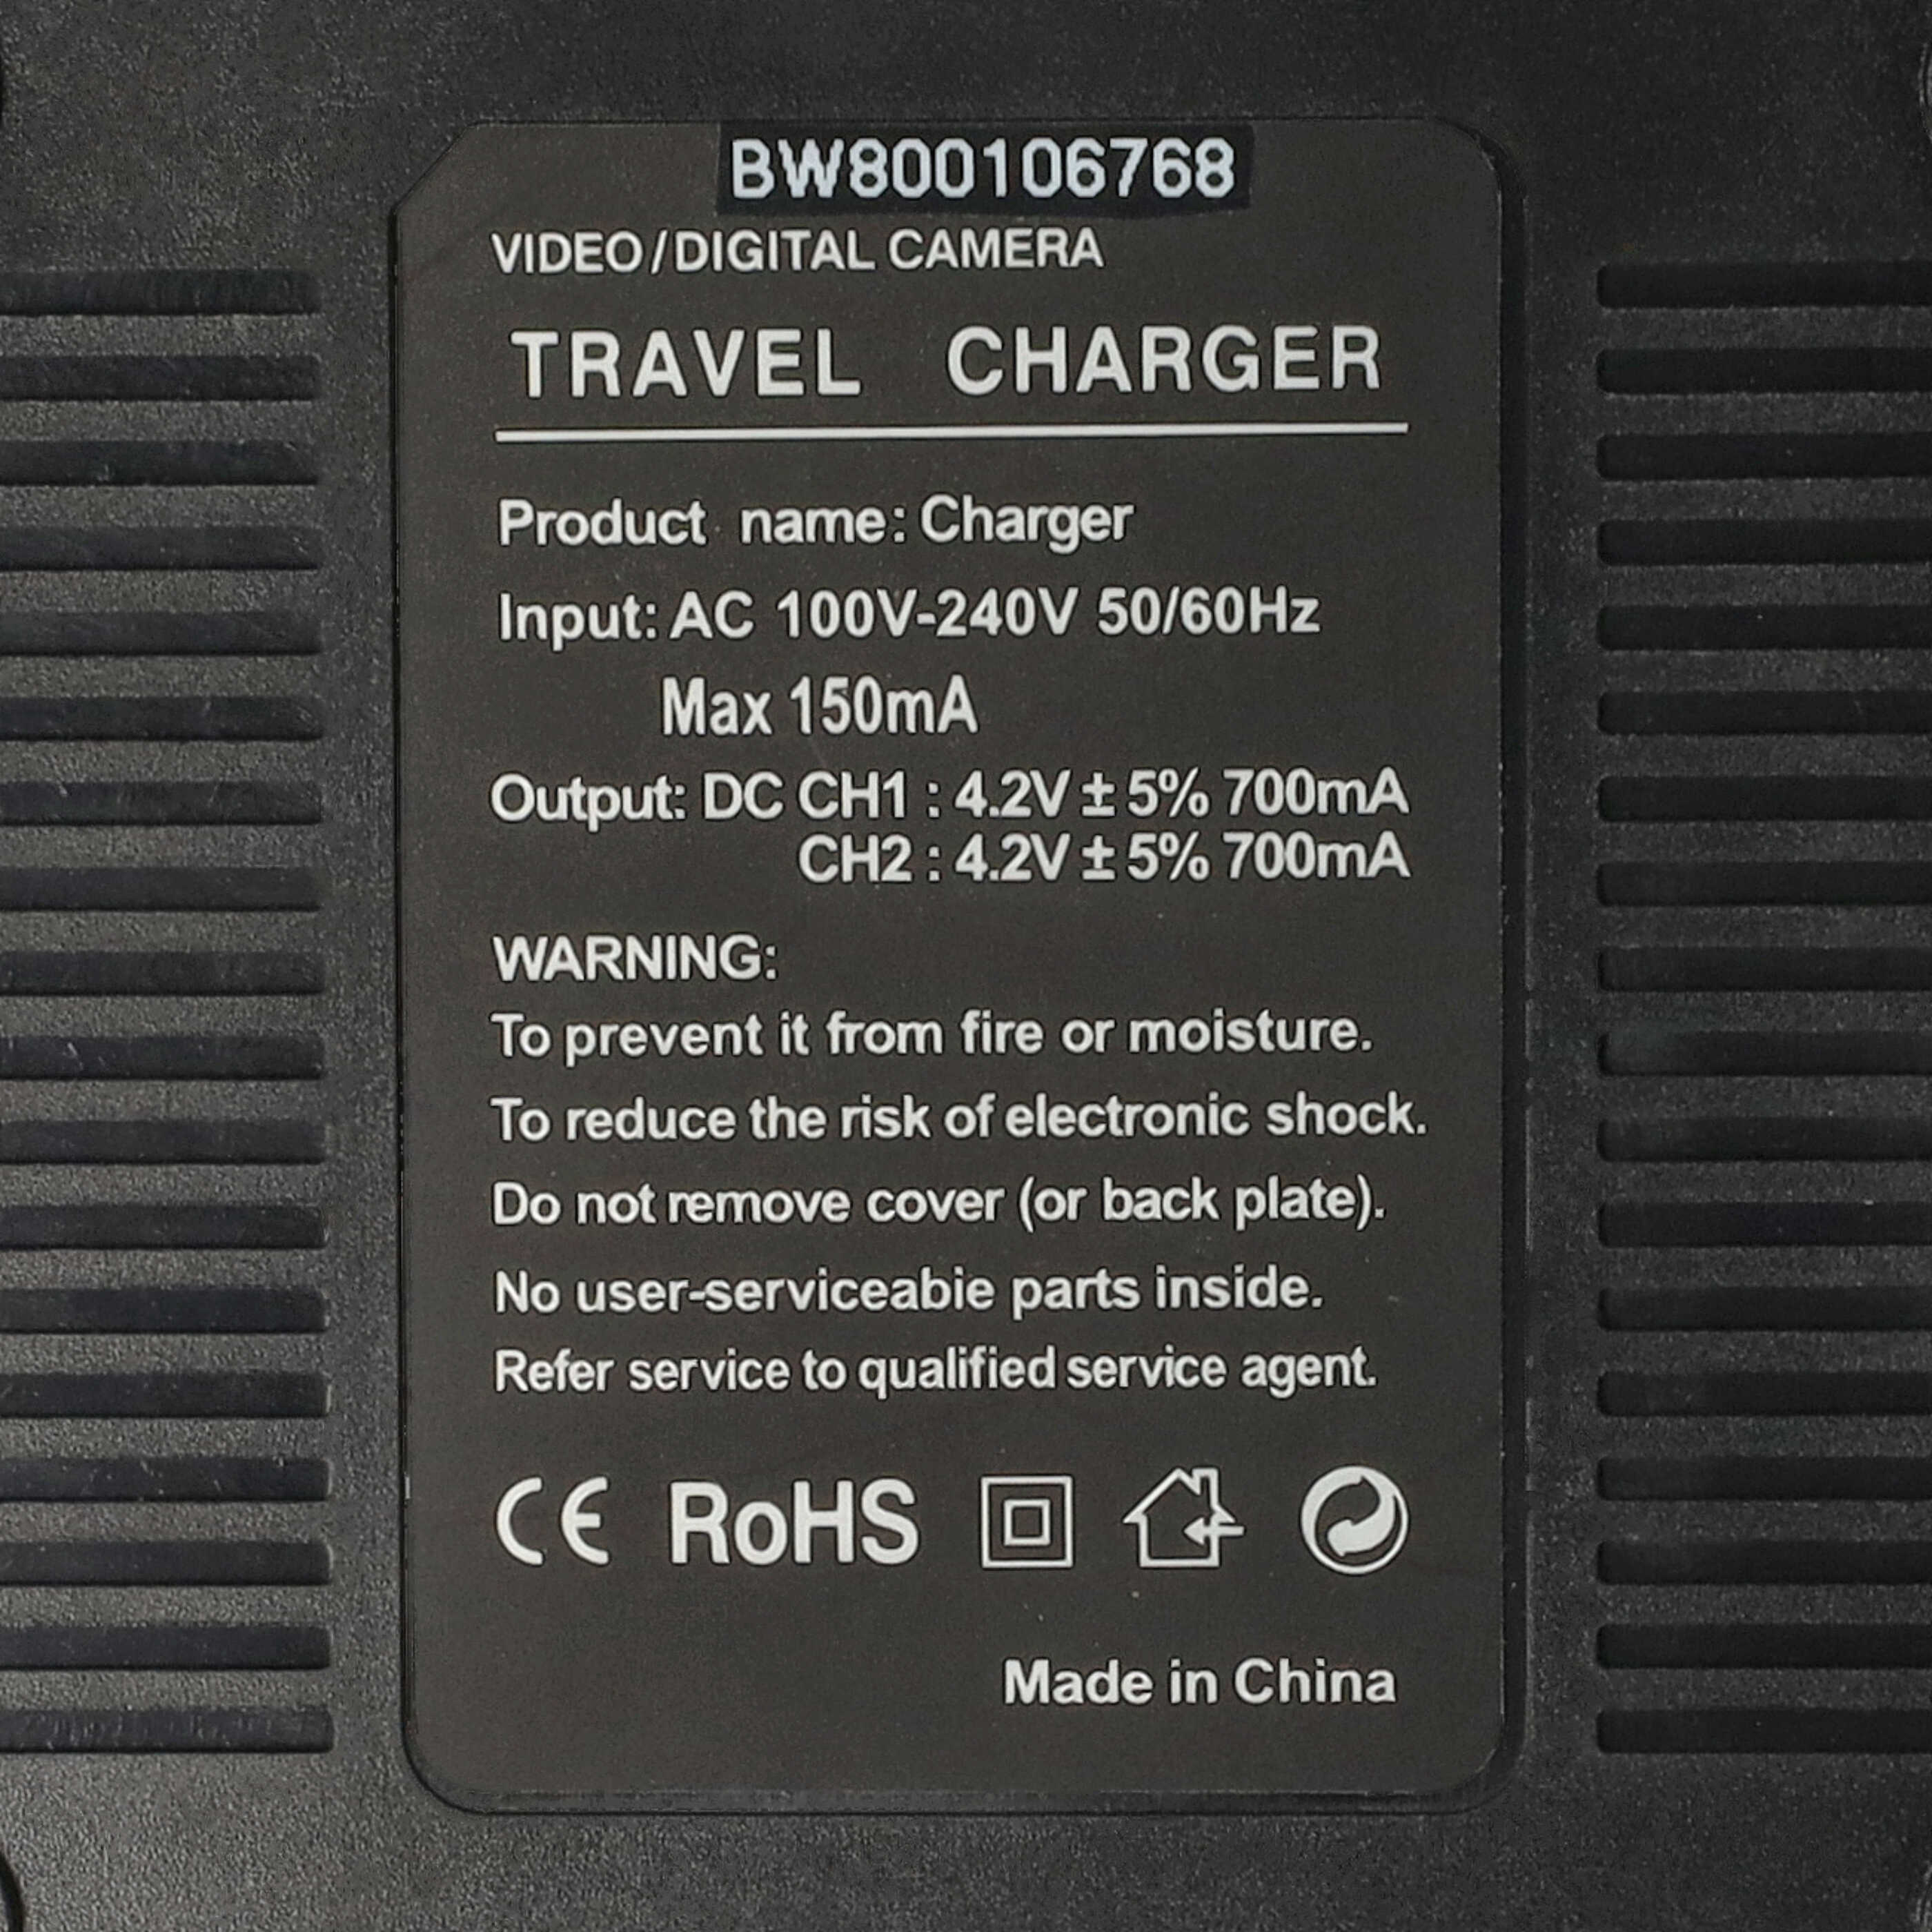 Battery Charger suitable for Canon NB-7L Camera etc. - 0.5 / 0.9 A, 4.2/8.4 V